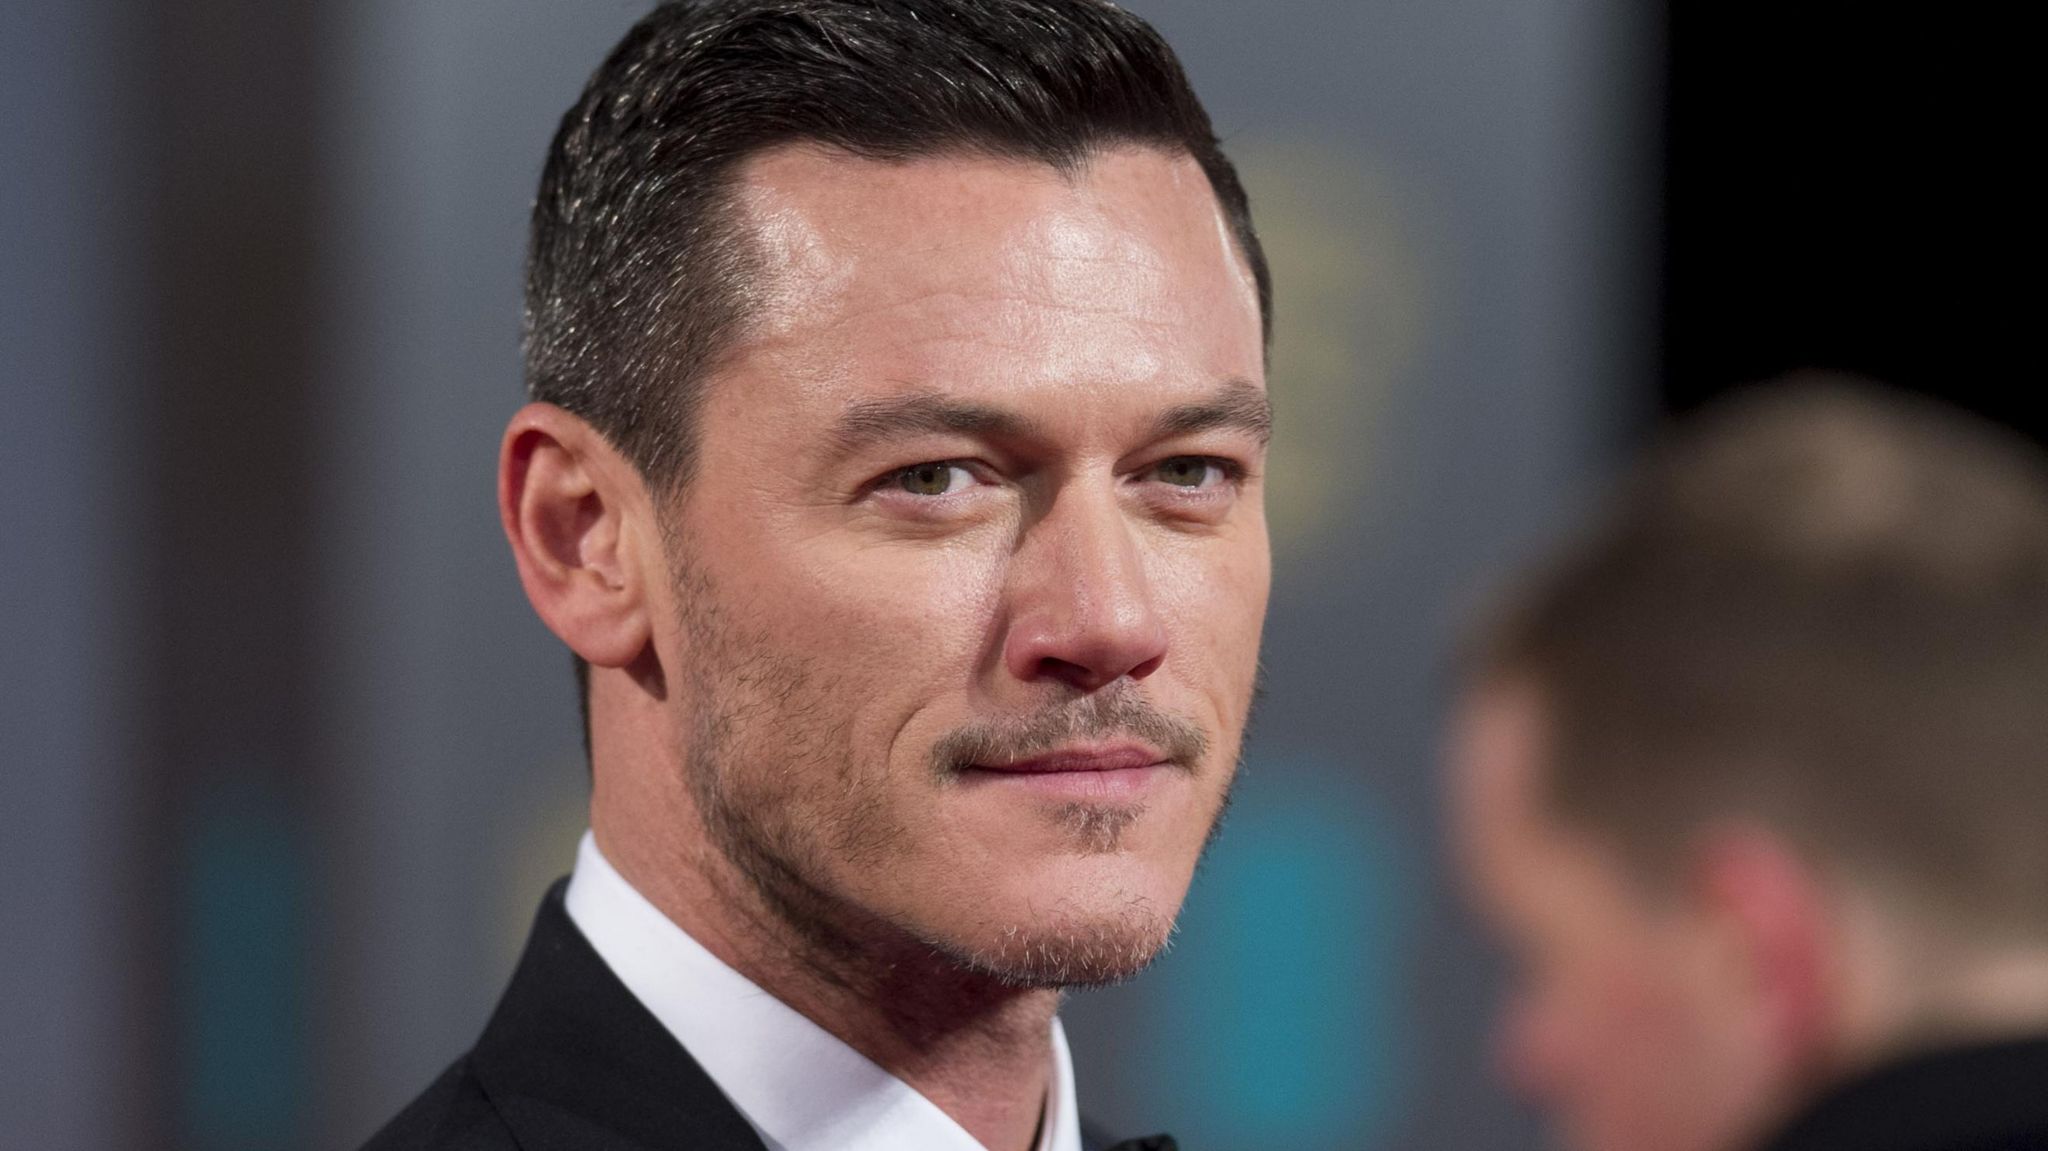 “We’re both proud gay men.” Luke Evans on gay drama ‘Our Son’ and working with ‘Pose’ star, Billy Porter